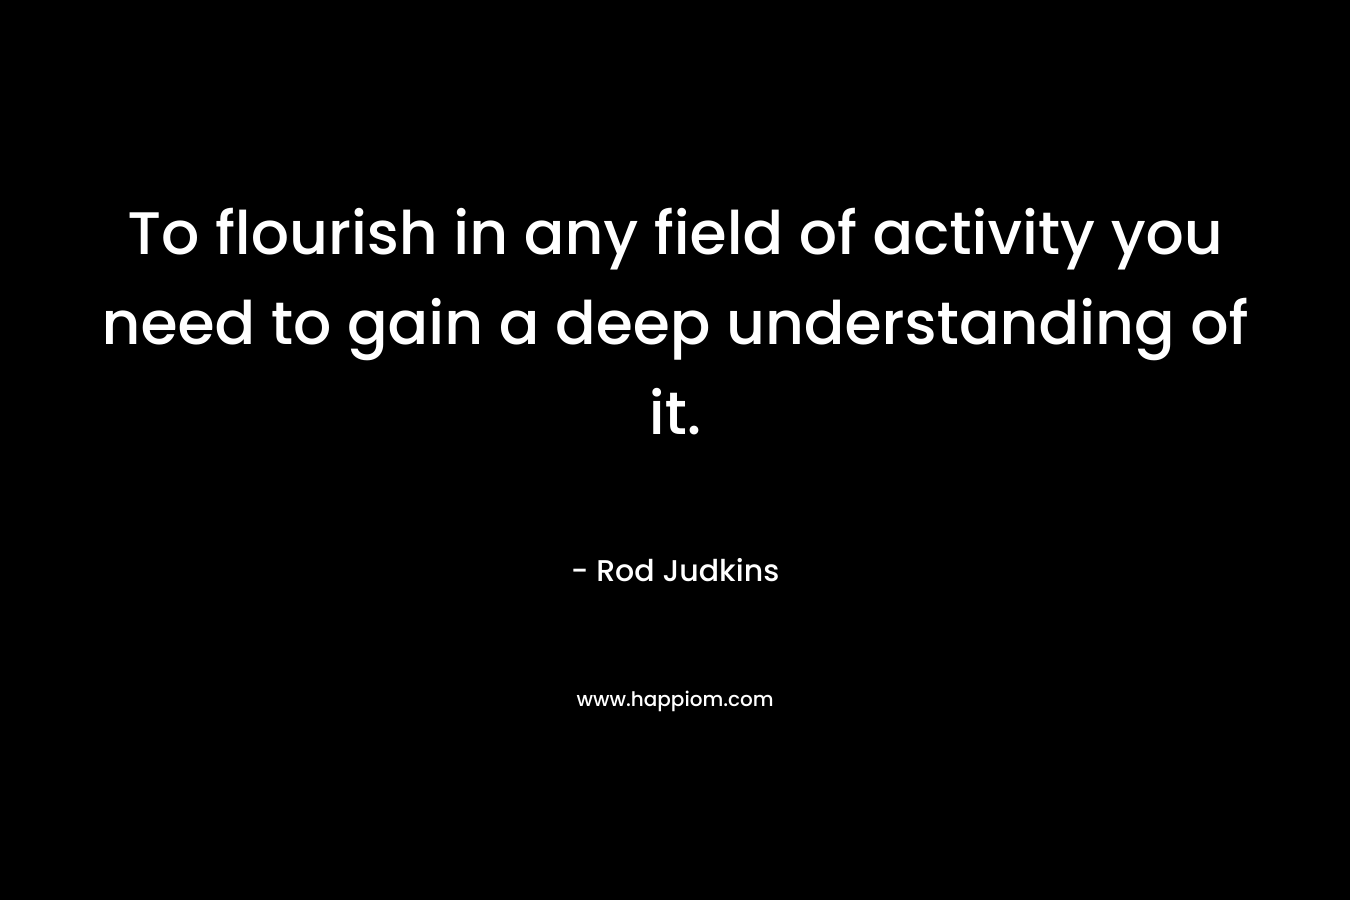 To flourish in any field of activity you need to gain a deep understanding of it. – Rod Judkins